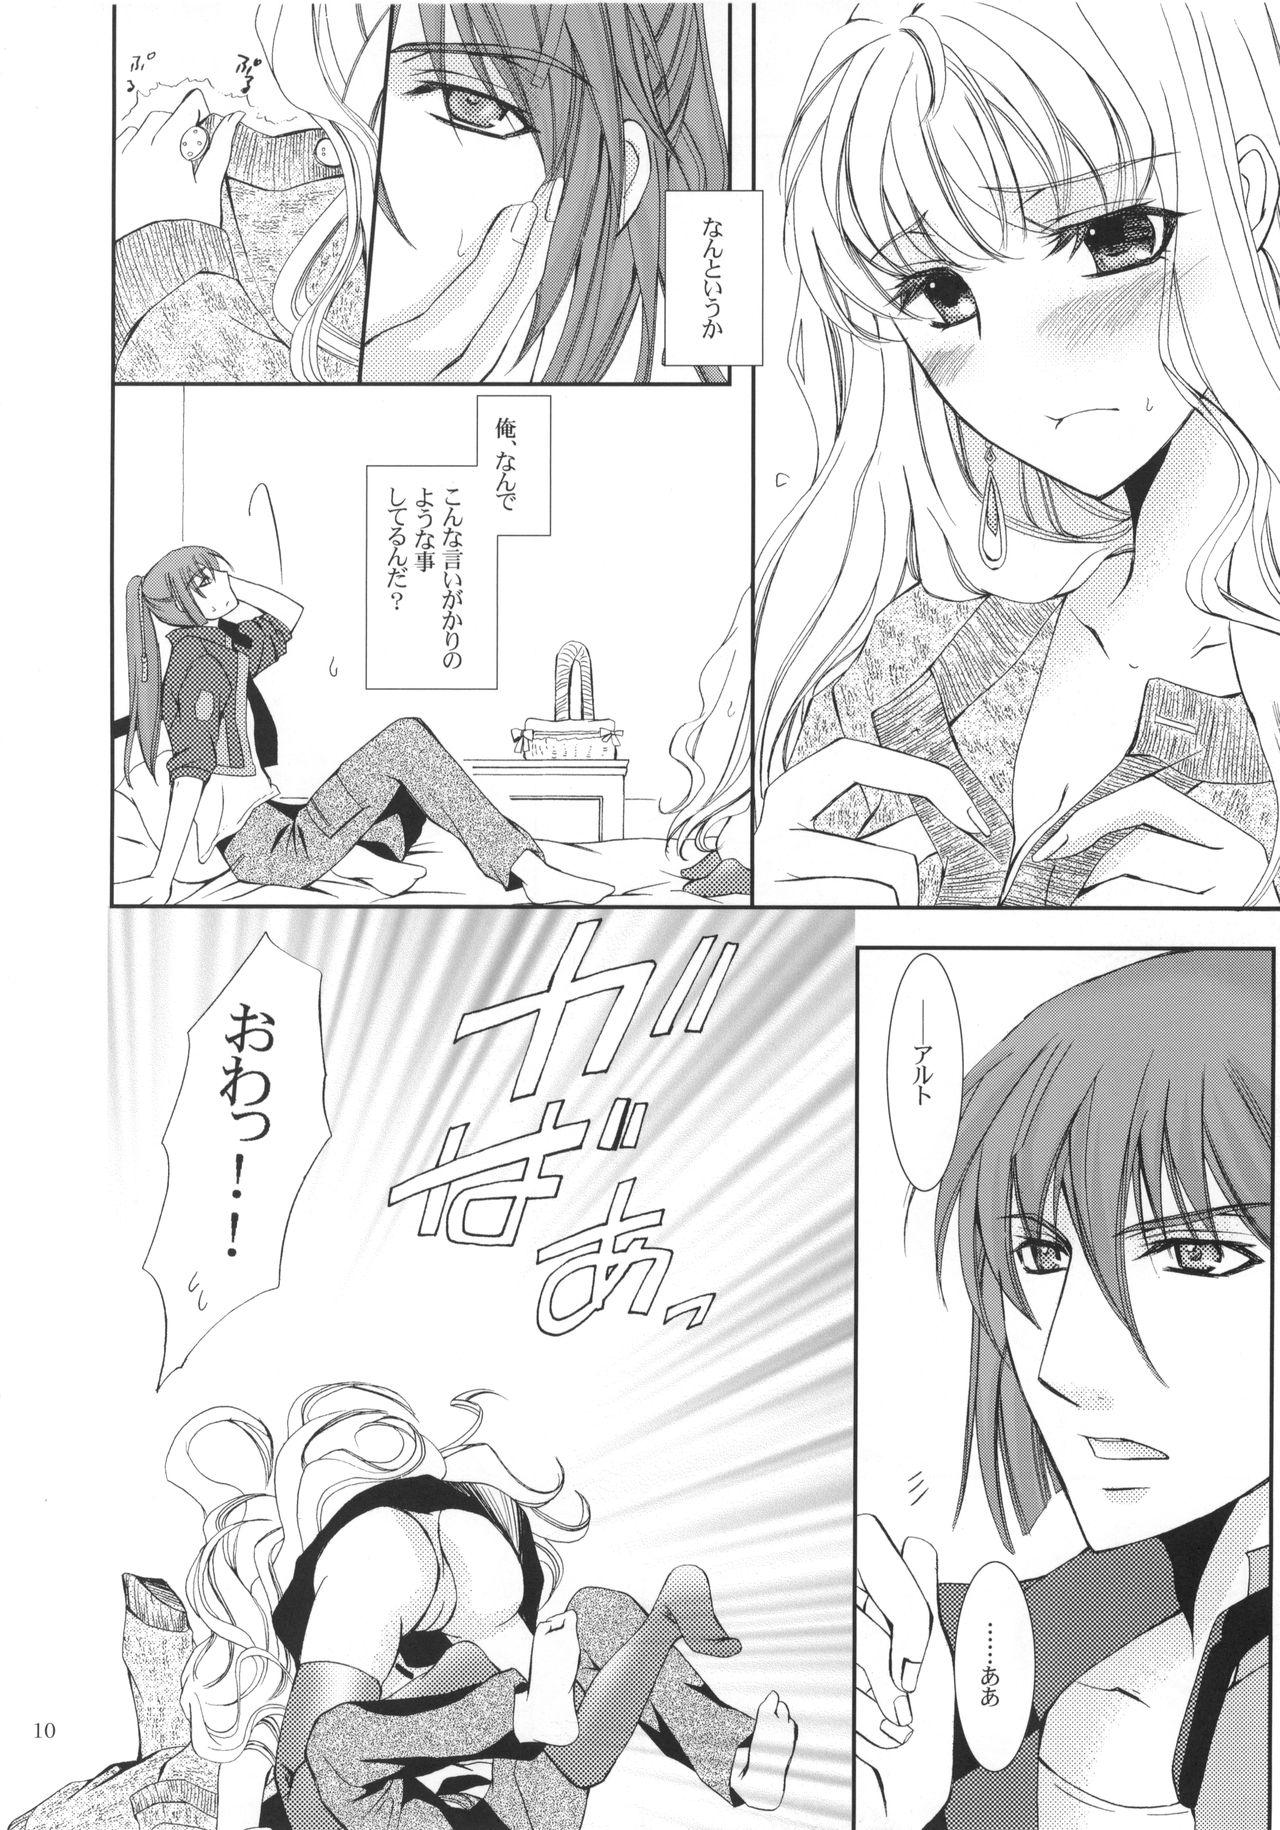 Lover Sweets Master - Macross frontier Sixtynine - Page 9